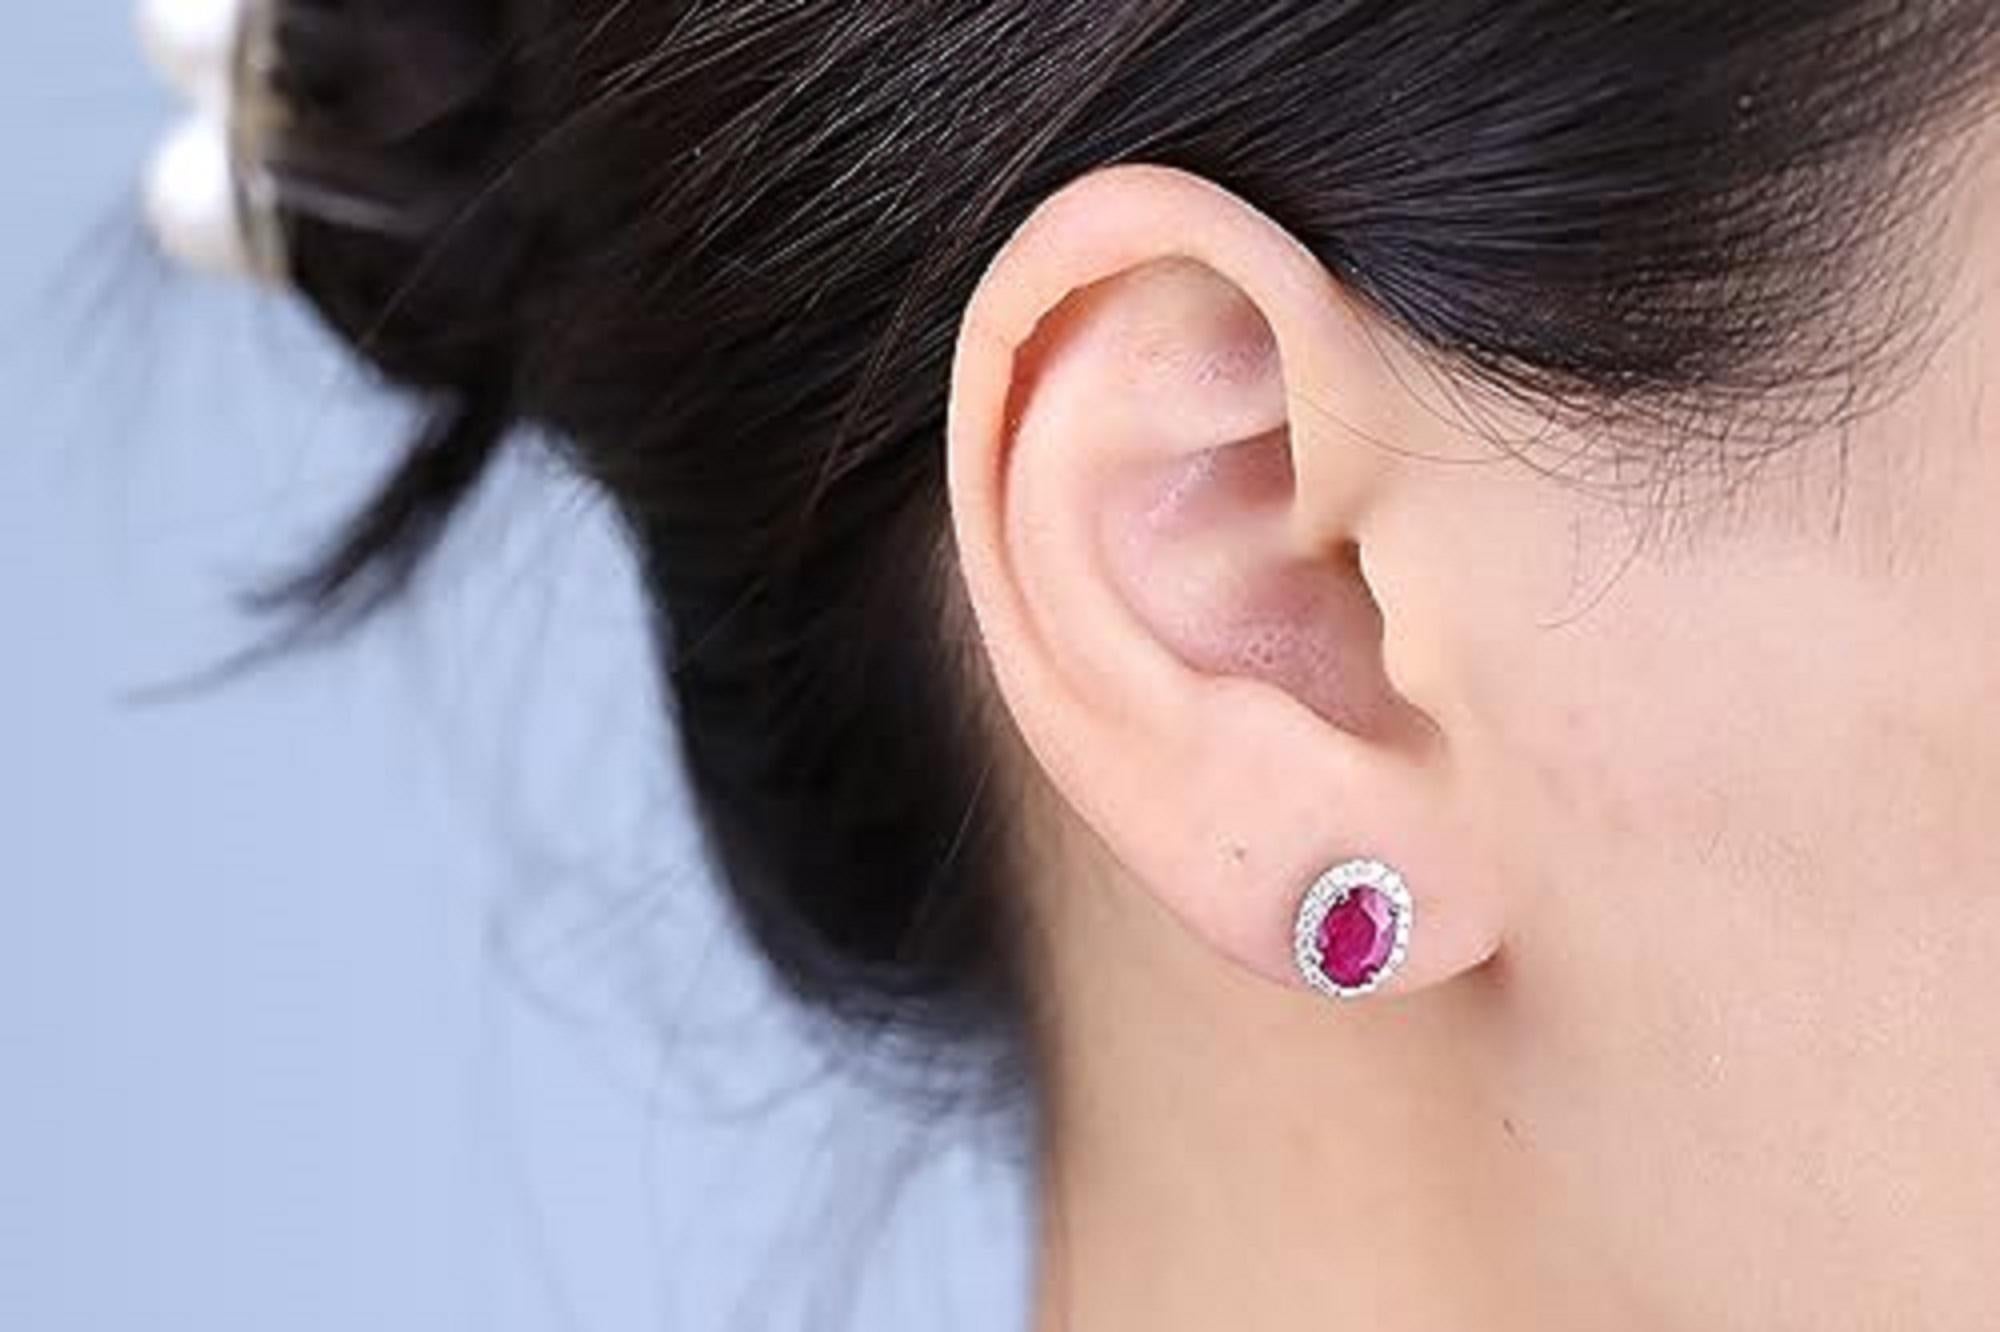 Decorate yourself in elegance with this Earring is crafted from 10-karat White Gold by Gin & Grace Earring. This Earring is made up of 7x5 mm Oval-Cut Ruby (2 pcs) 2.25 carat and Round-cut White Diamond (36 Pcs) 0.28 Carat. This Earring is weight